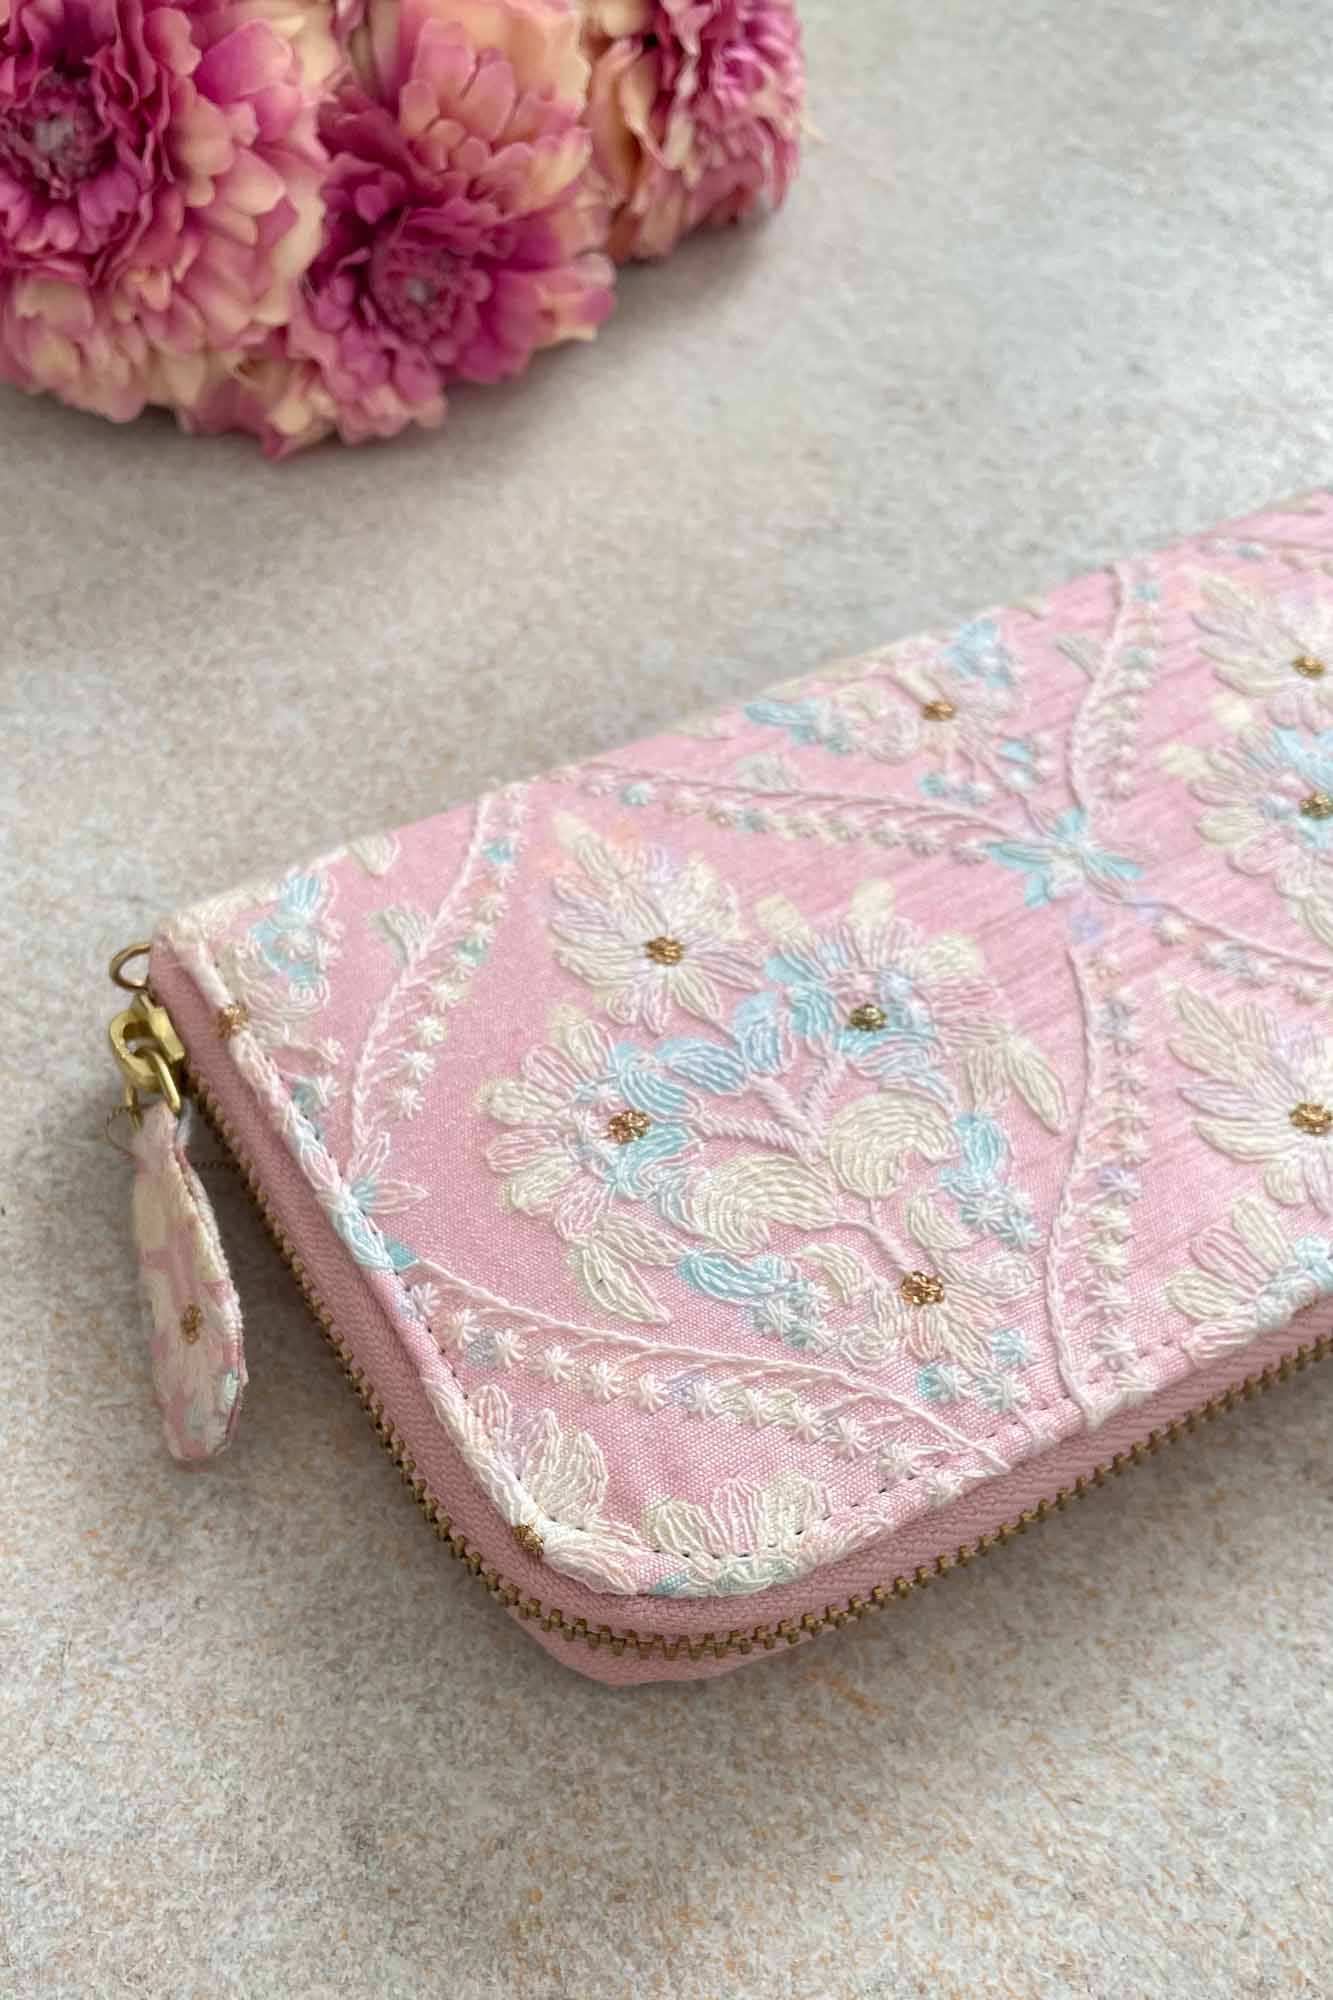 AMYRA Anaqat silk embroidered wallet - baby pink